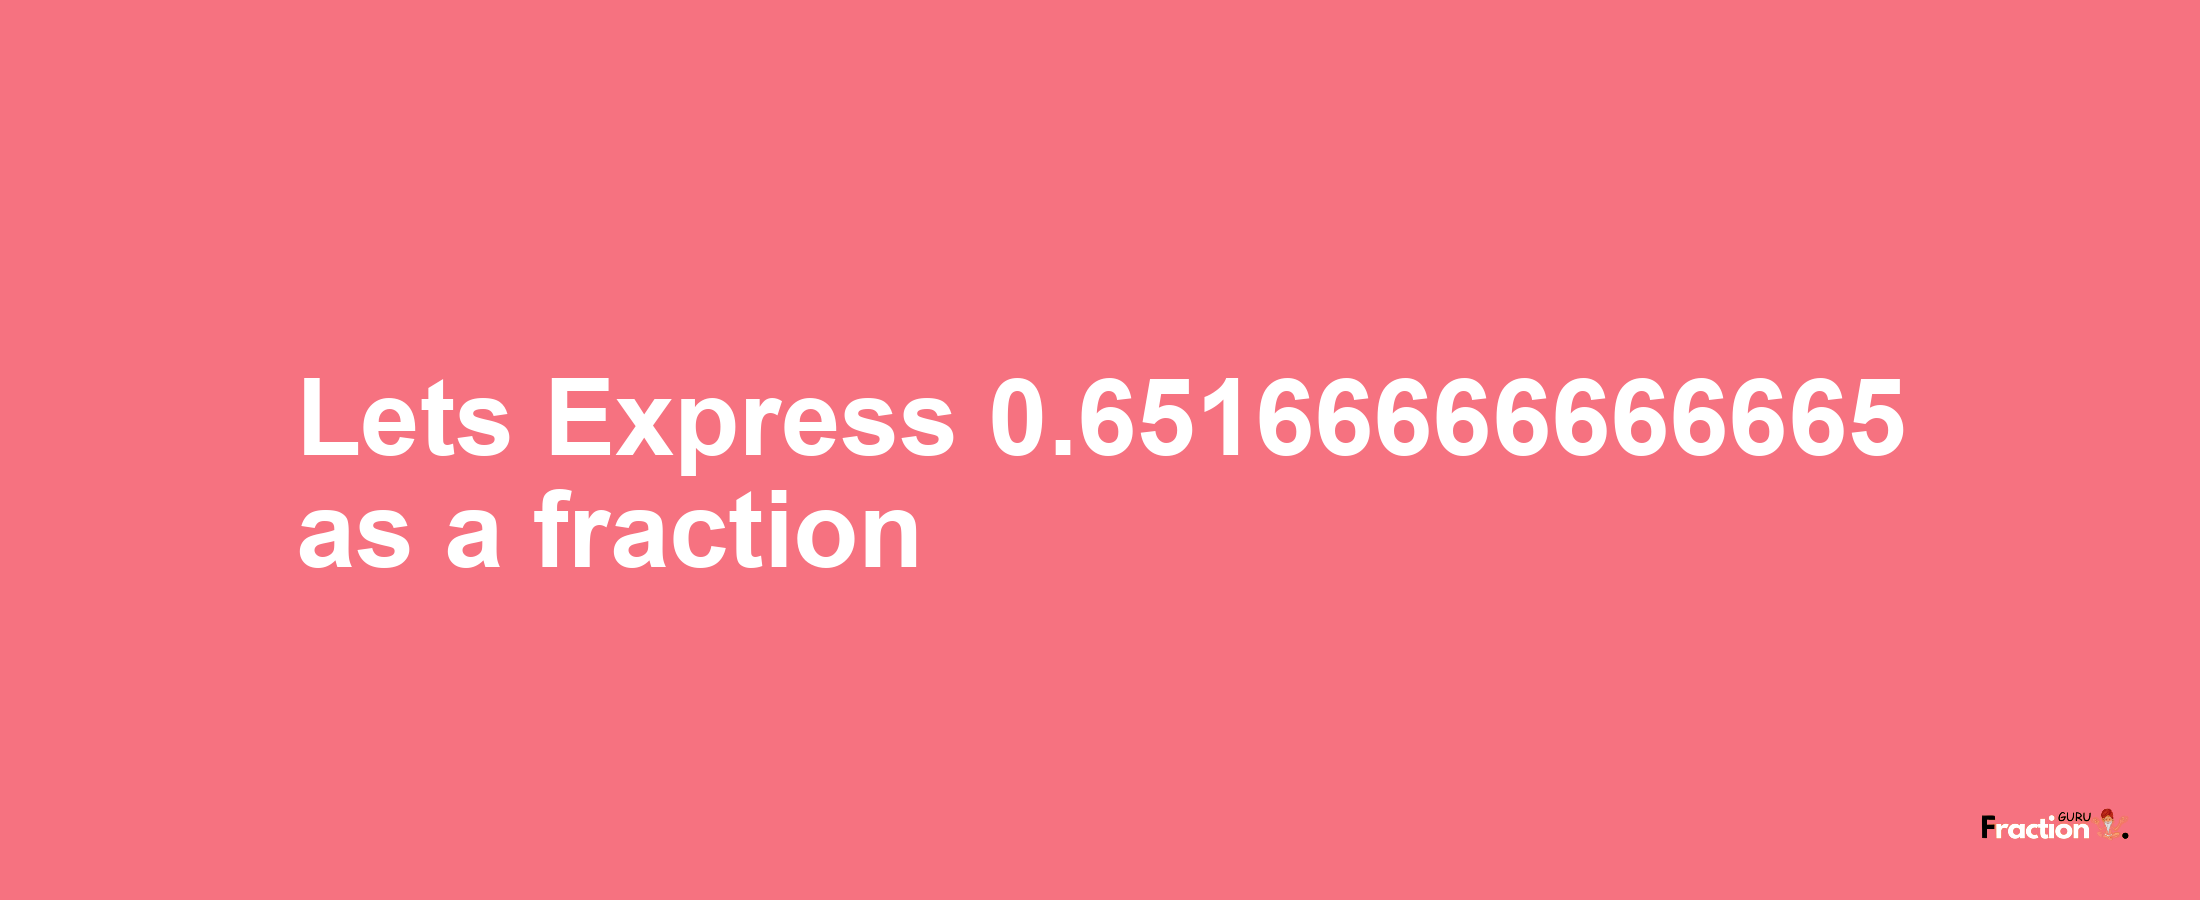 Lets Express 0.65166666666665 as afraction